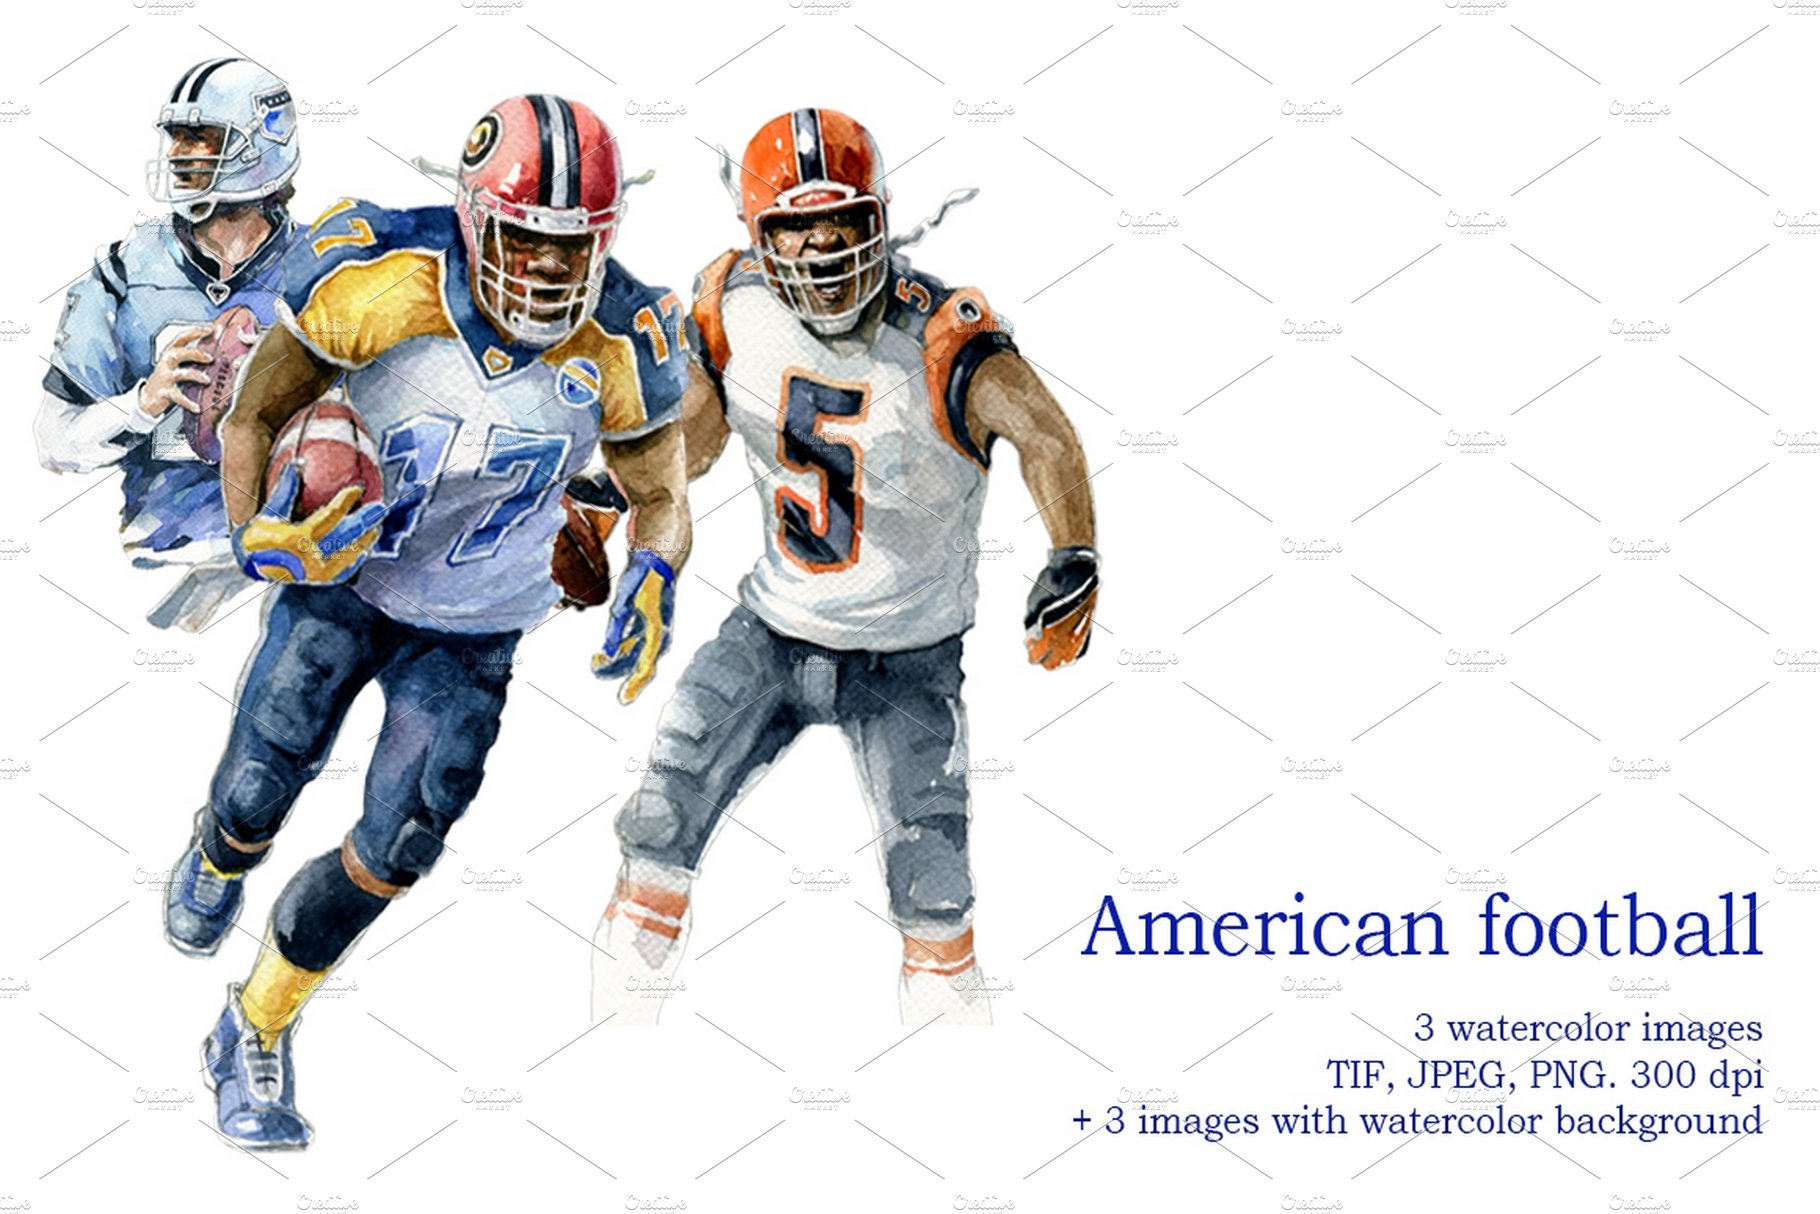 American football cover image.